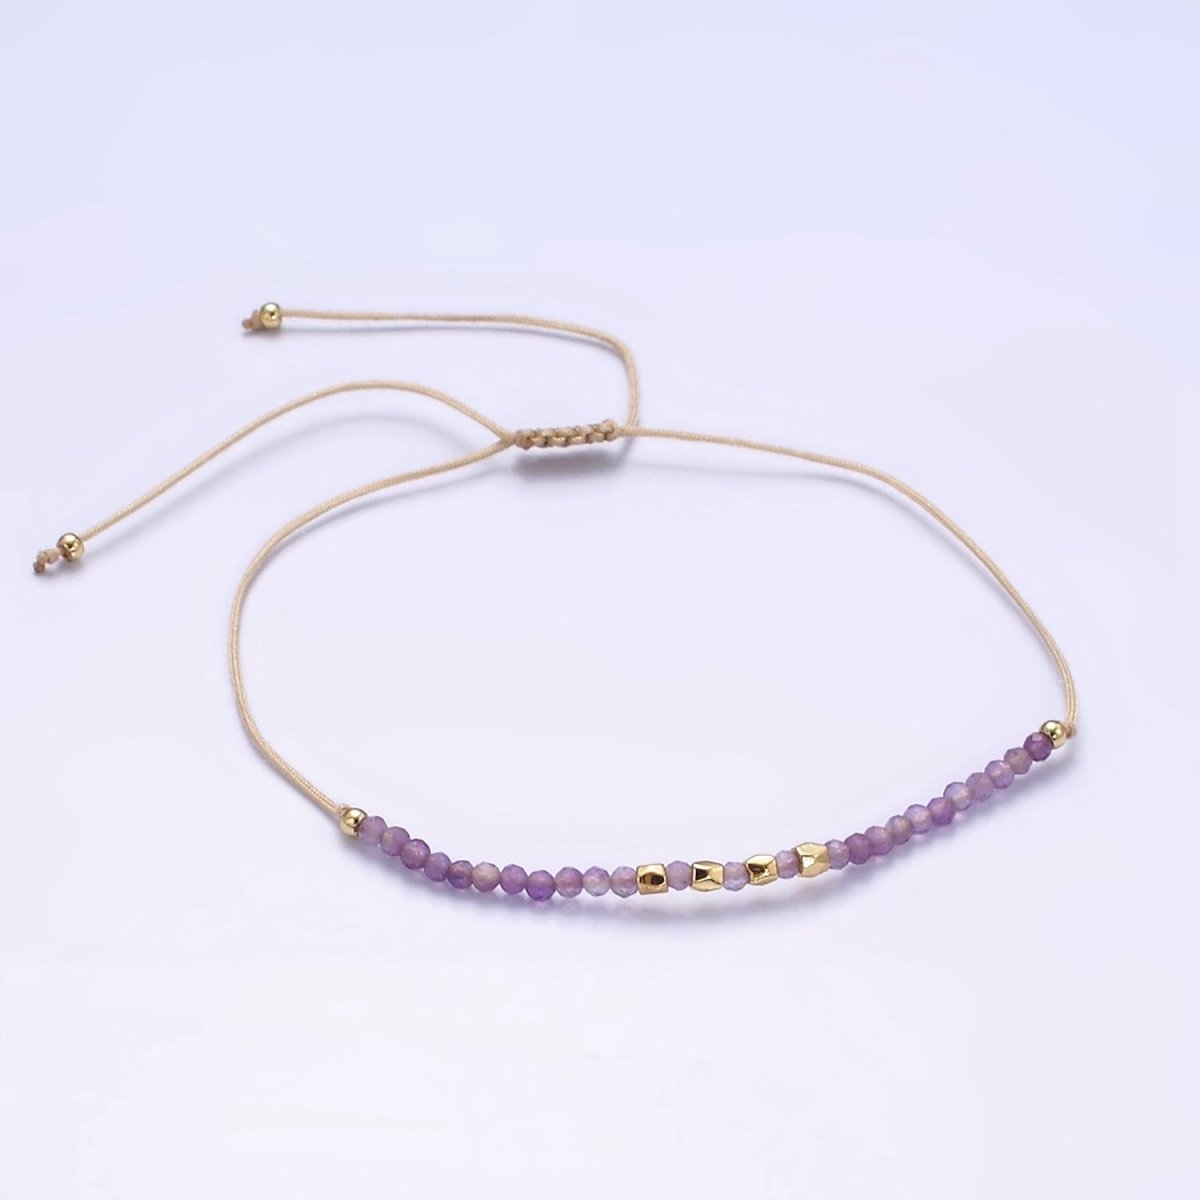 14K Gold Filled Amethyst Multifaceted Beige Rope Adjustable Friendship Bracelet | WA-2187 - WA-2189 Clearance Pricing - DLUXCA